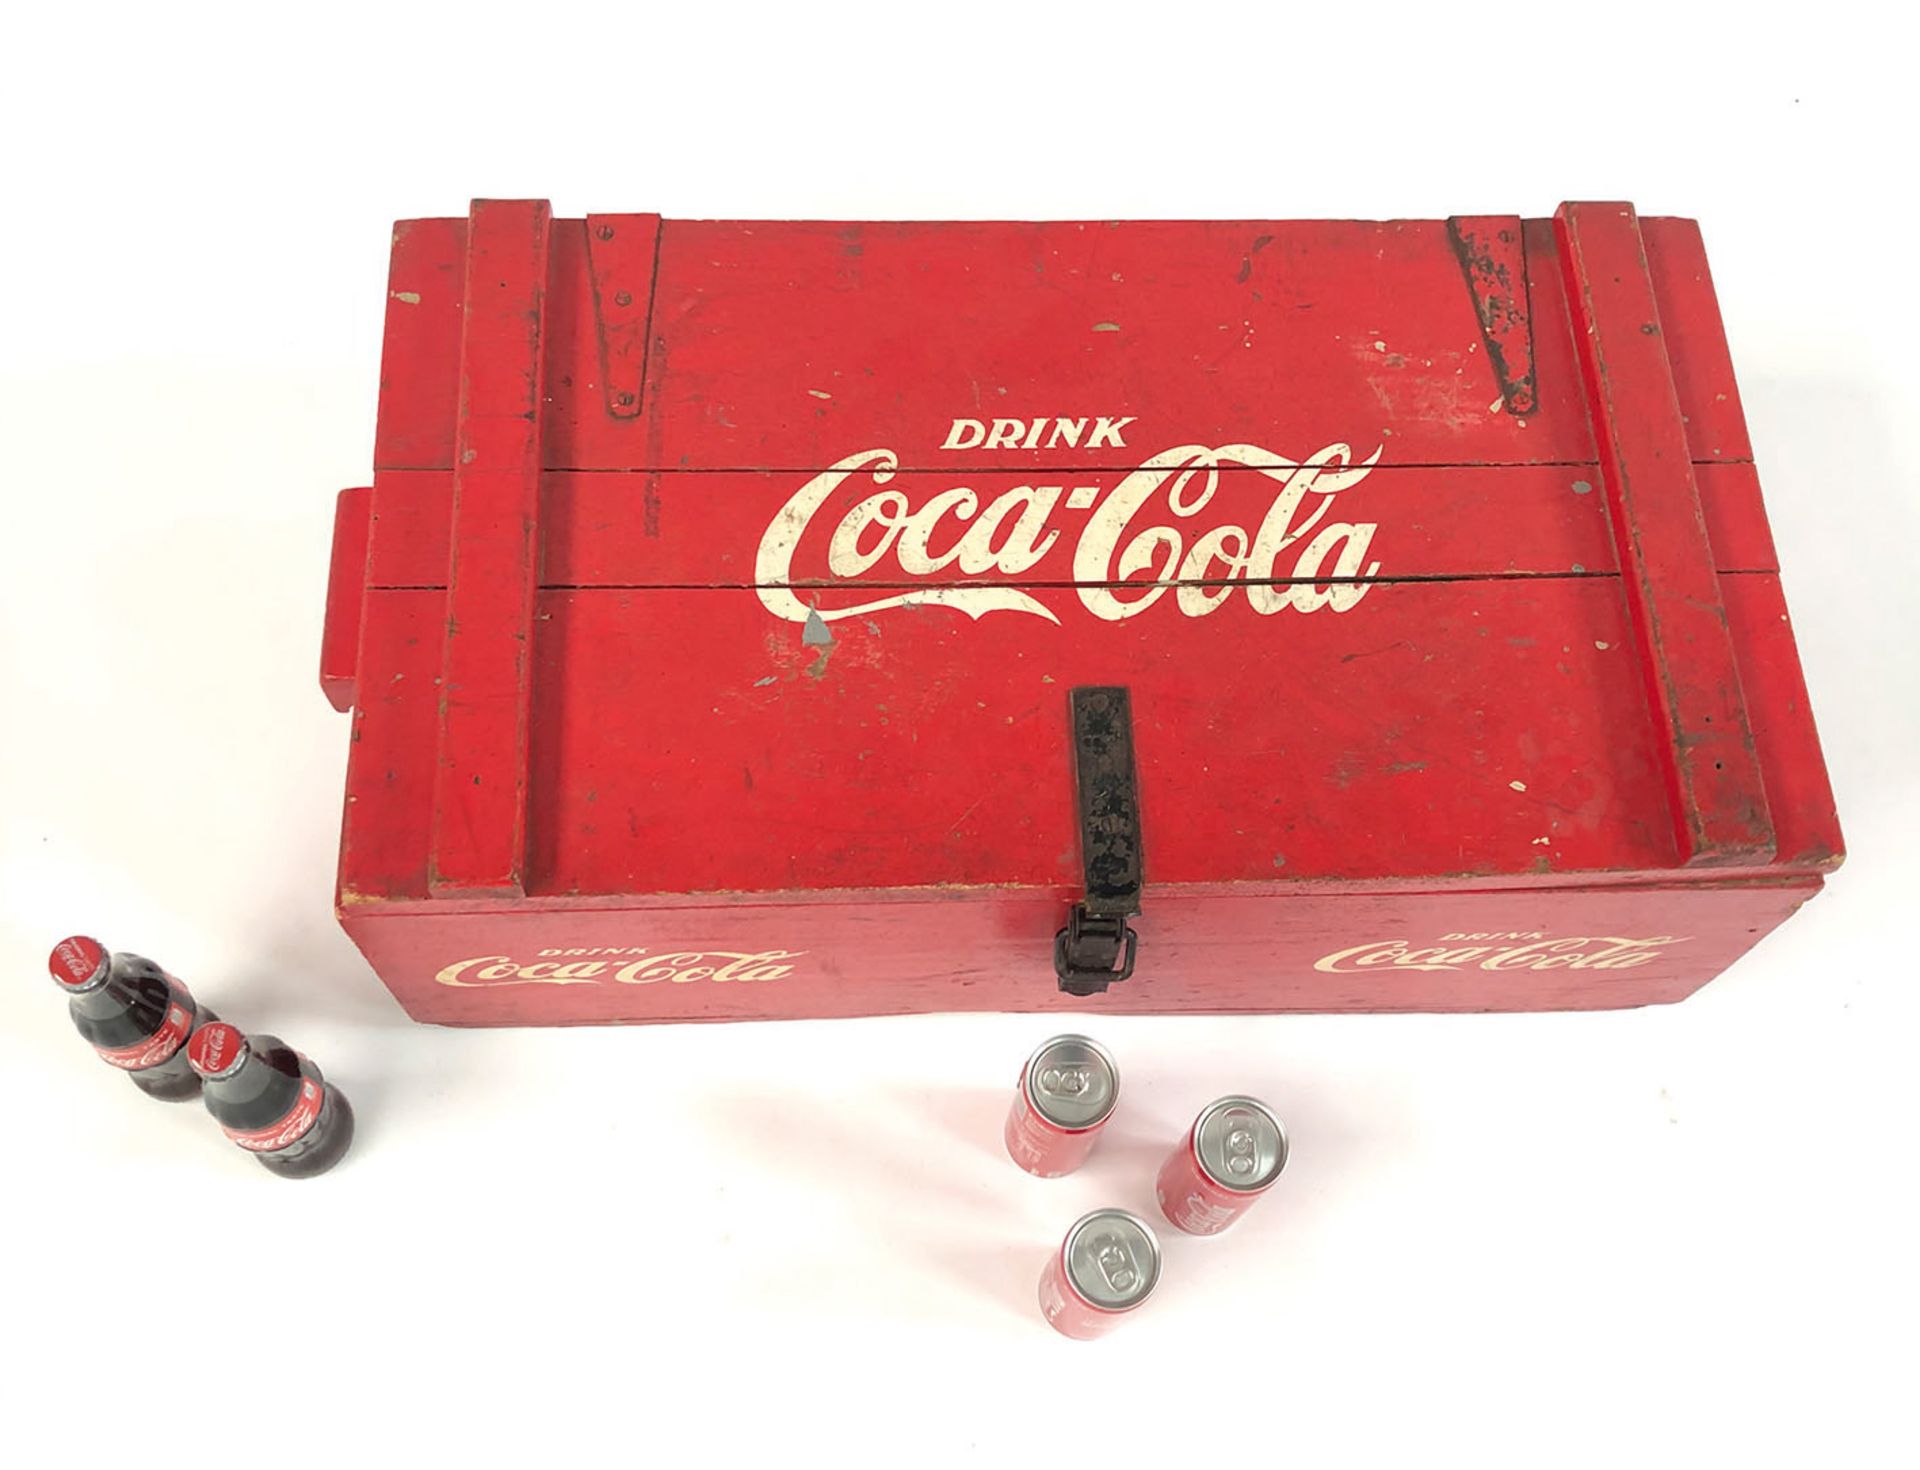 Original Coca-Cola Wooden Ice Box from Netherlands - Image 3 of 5